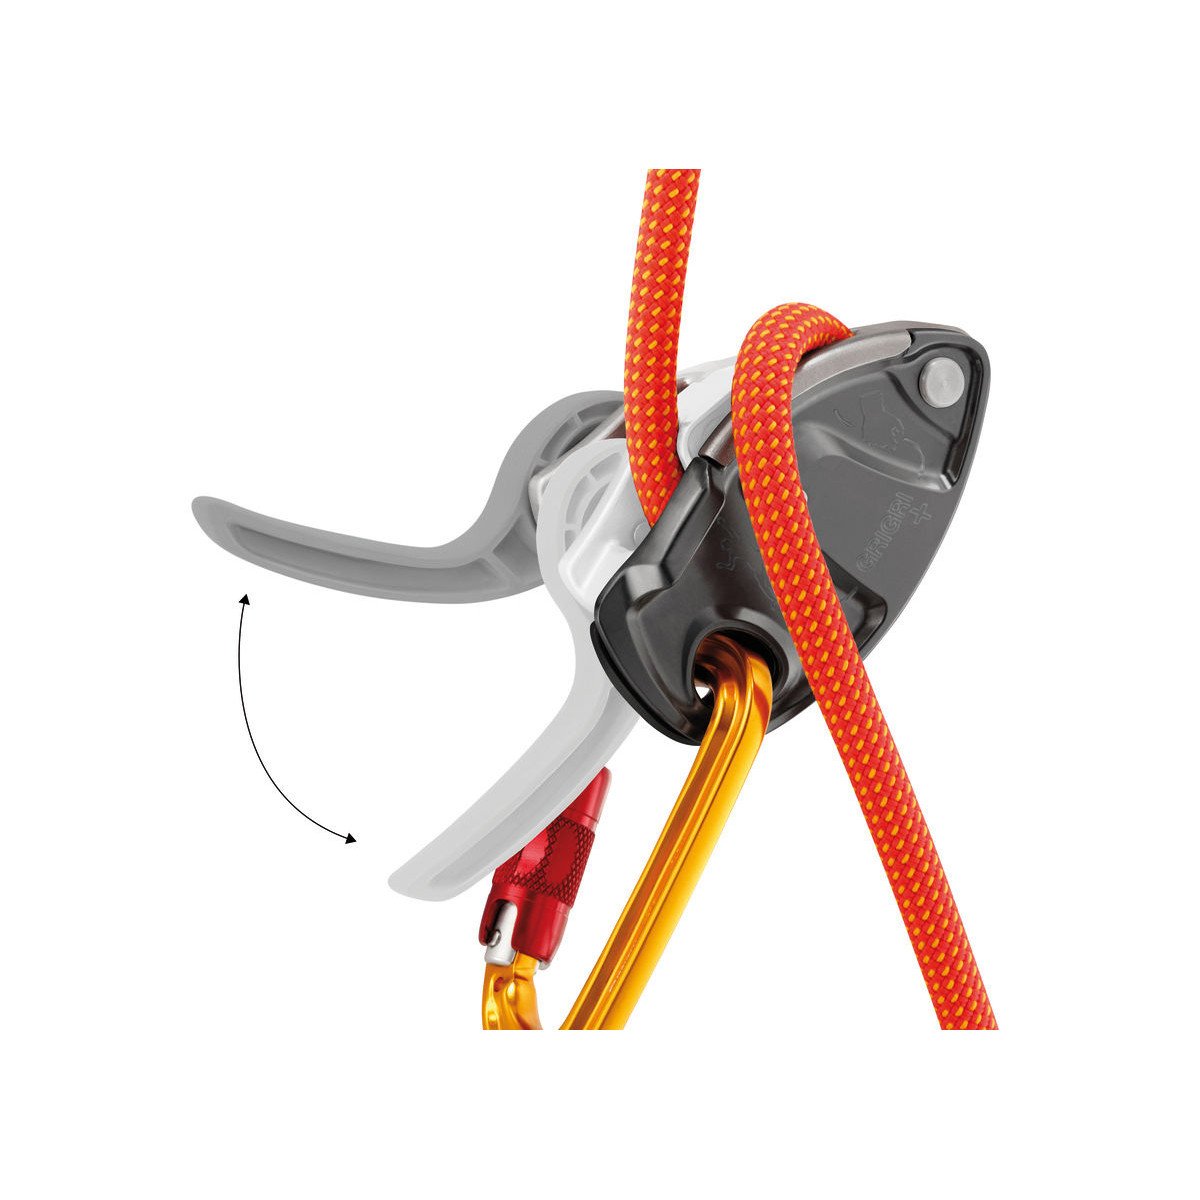 Petzl Grigri + belay device, showing closed in use closed with rope